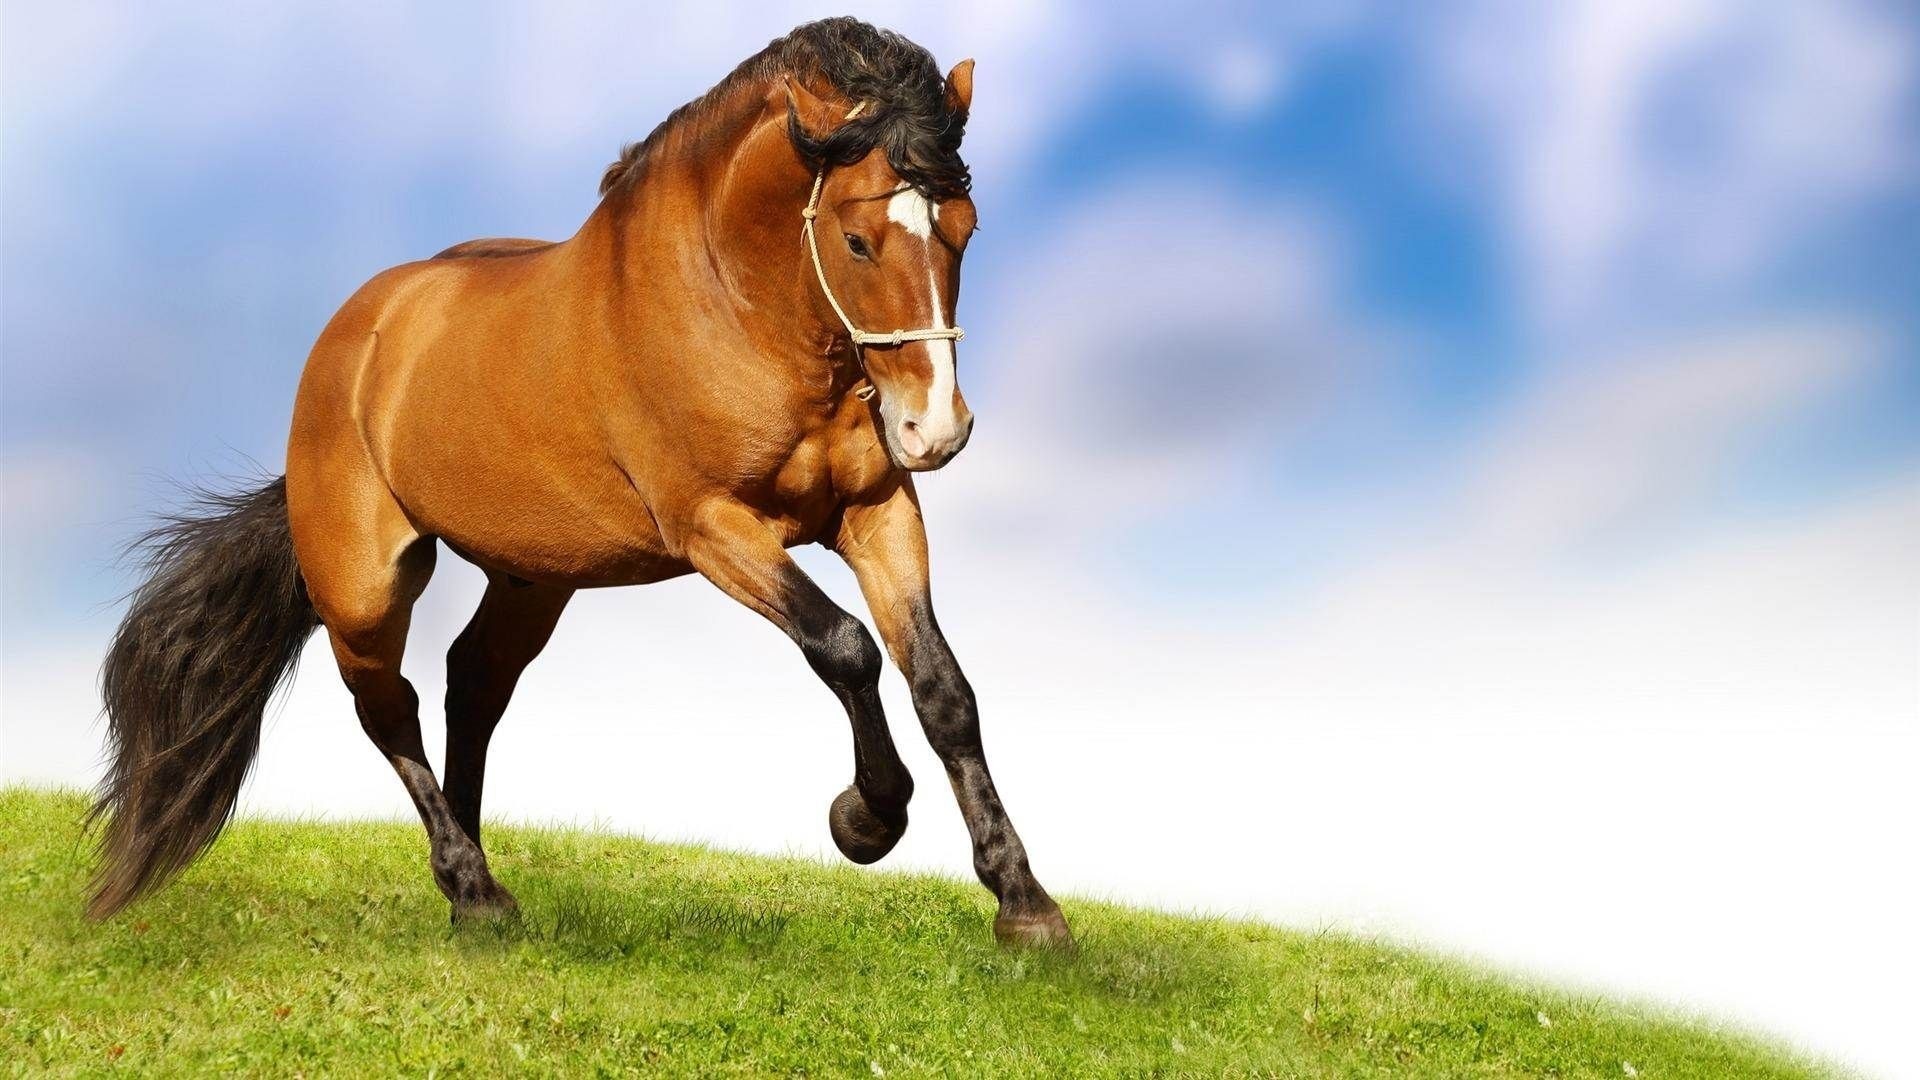 1920x1080 ... Modern and Efficient Downsized Breakfast Nook Horse Hd Wallpapers, Free  Wallpaper Downloads, ...